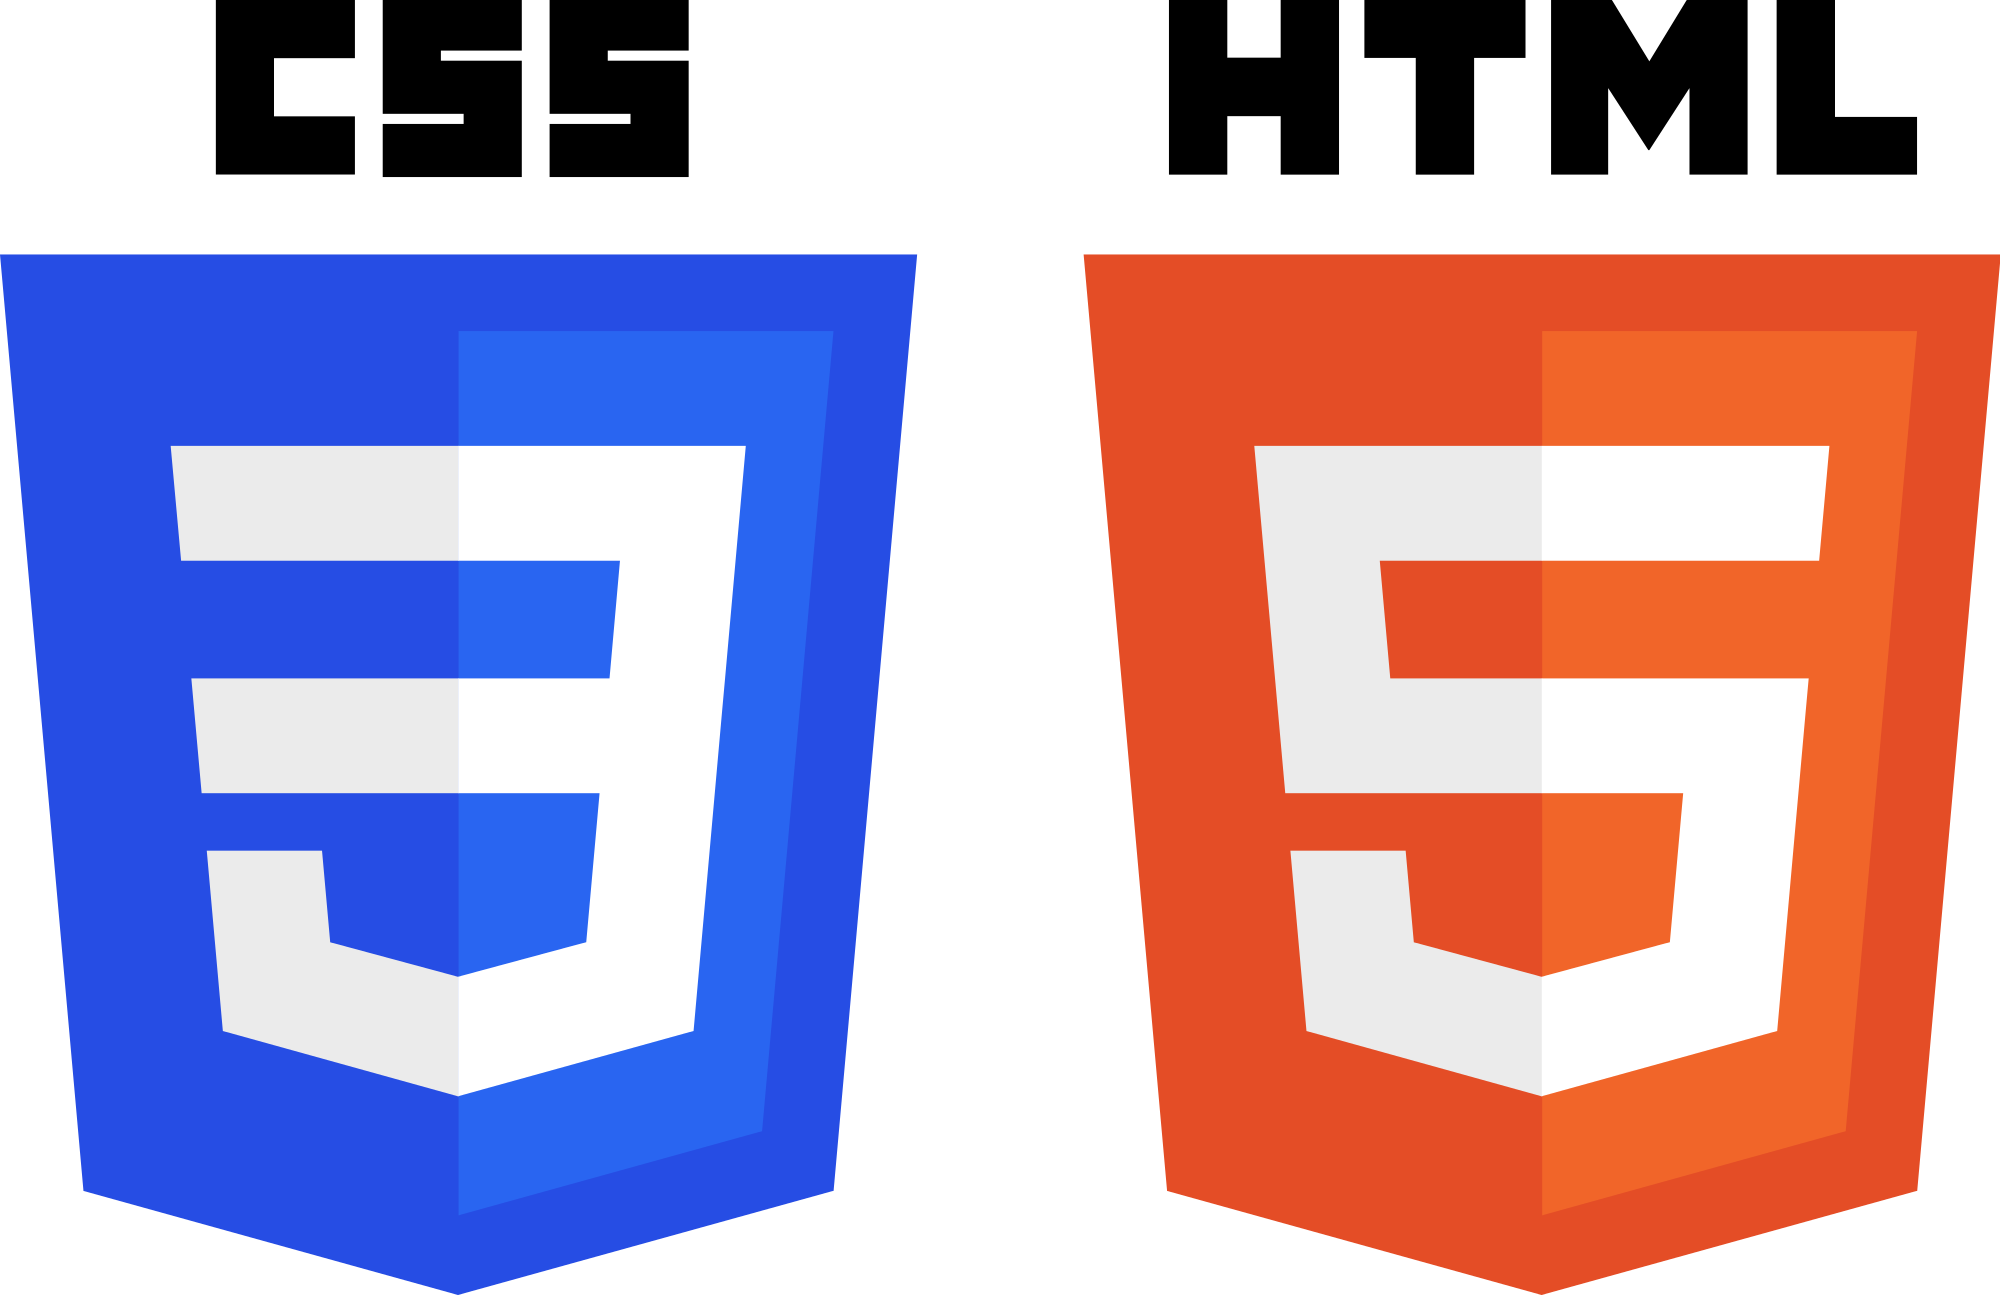 Les formations en HTML / CSS / PHP